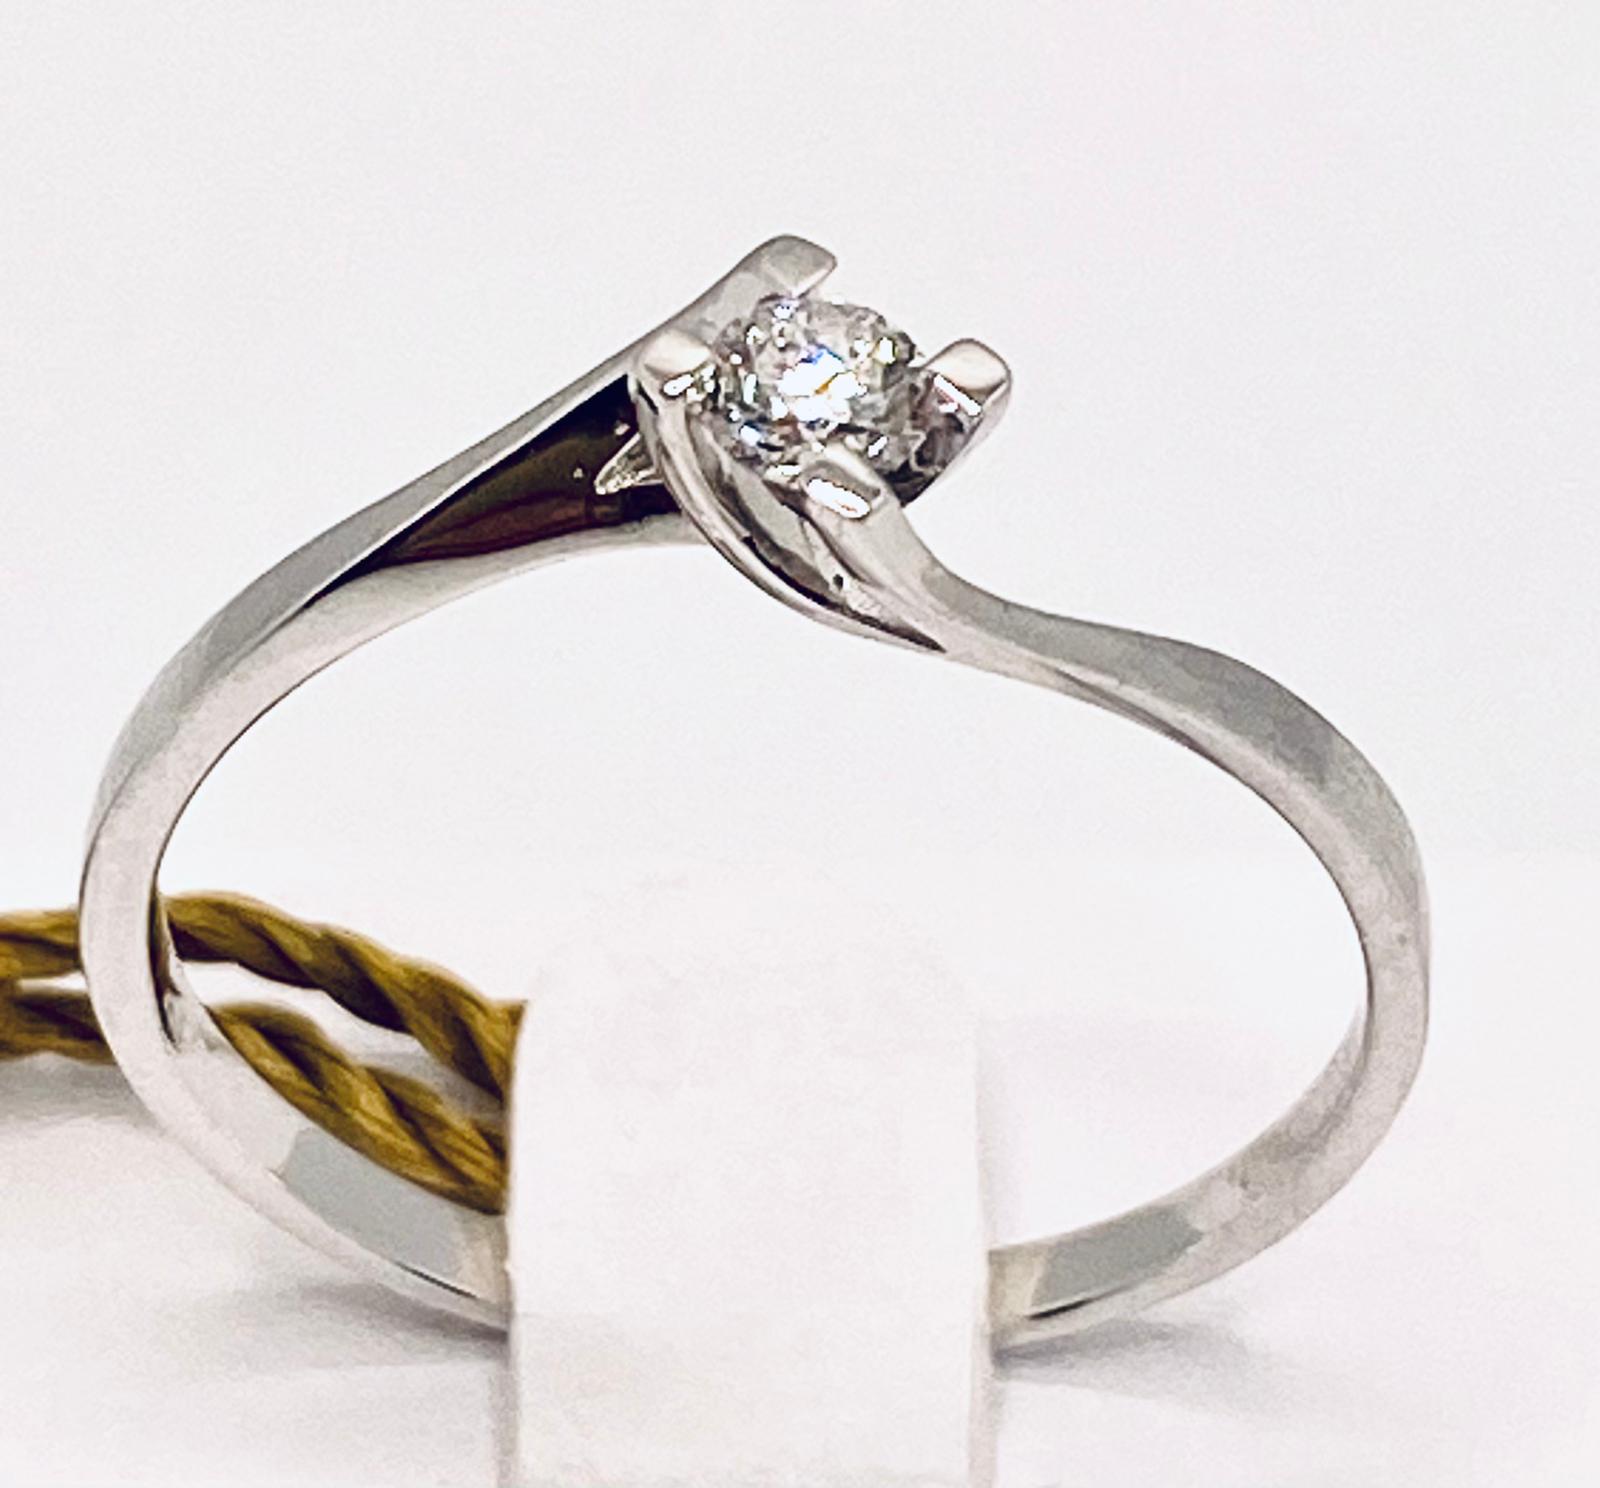 Solitary diamond ring to contract art.AN1412